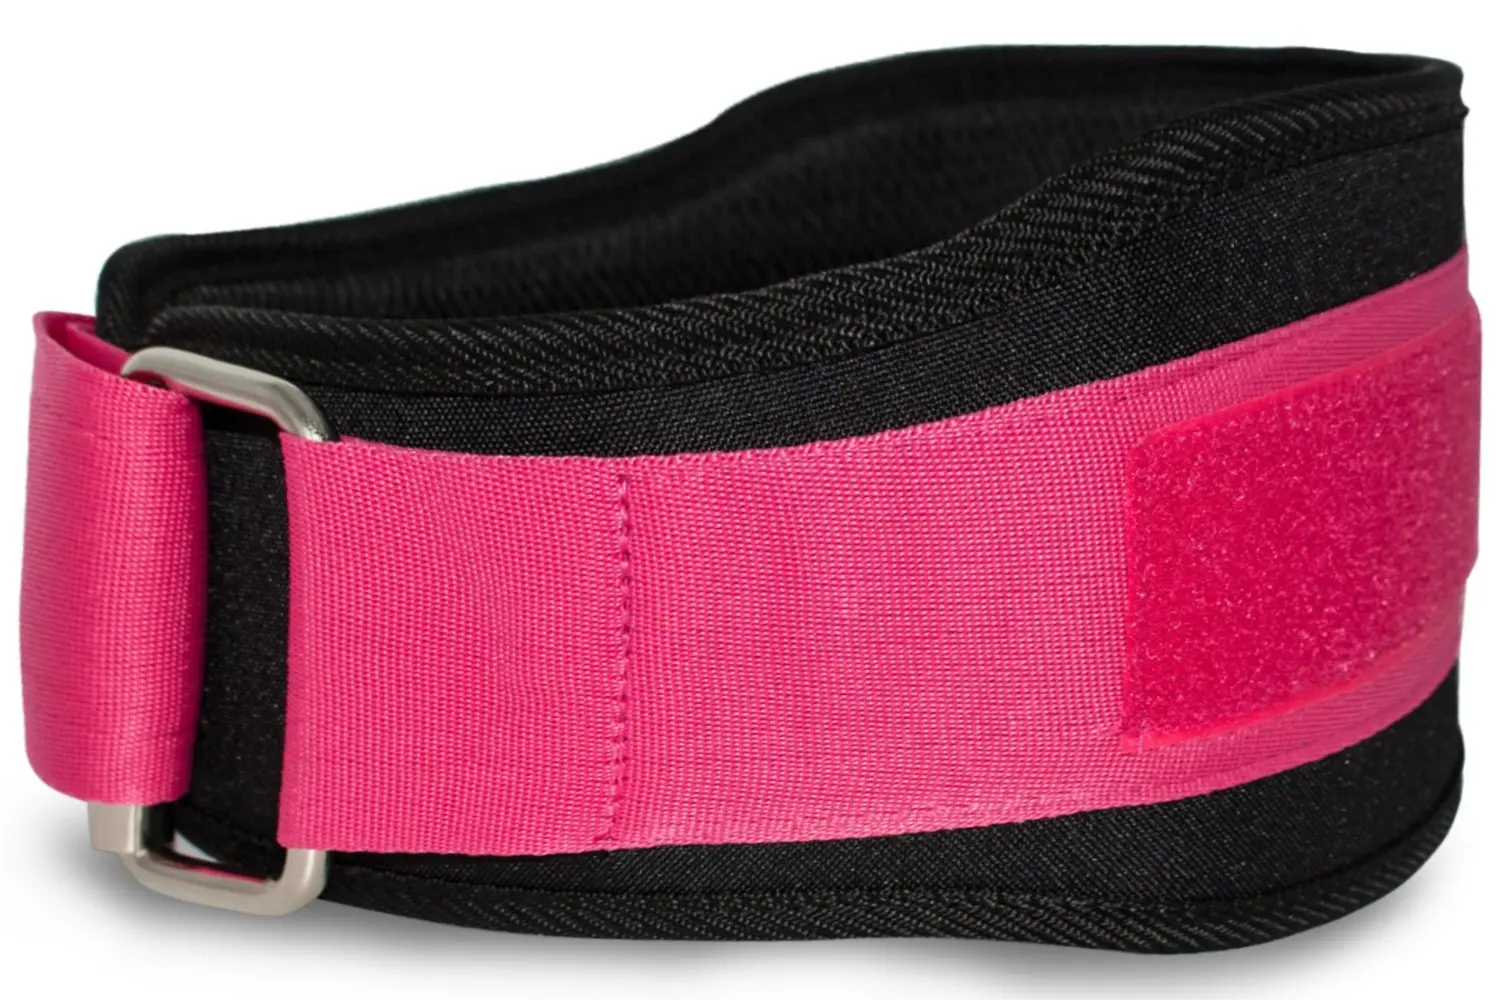 Farabi Pink Genuine Leather Weight Lifting Belt for Extreme Powerlifting Weightlifting Workout Gym Training Deadlift Back Lumbar Support Cardio Belt and Back Injury Protector 